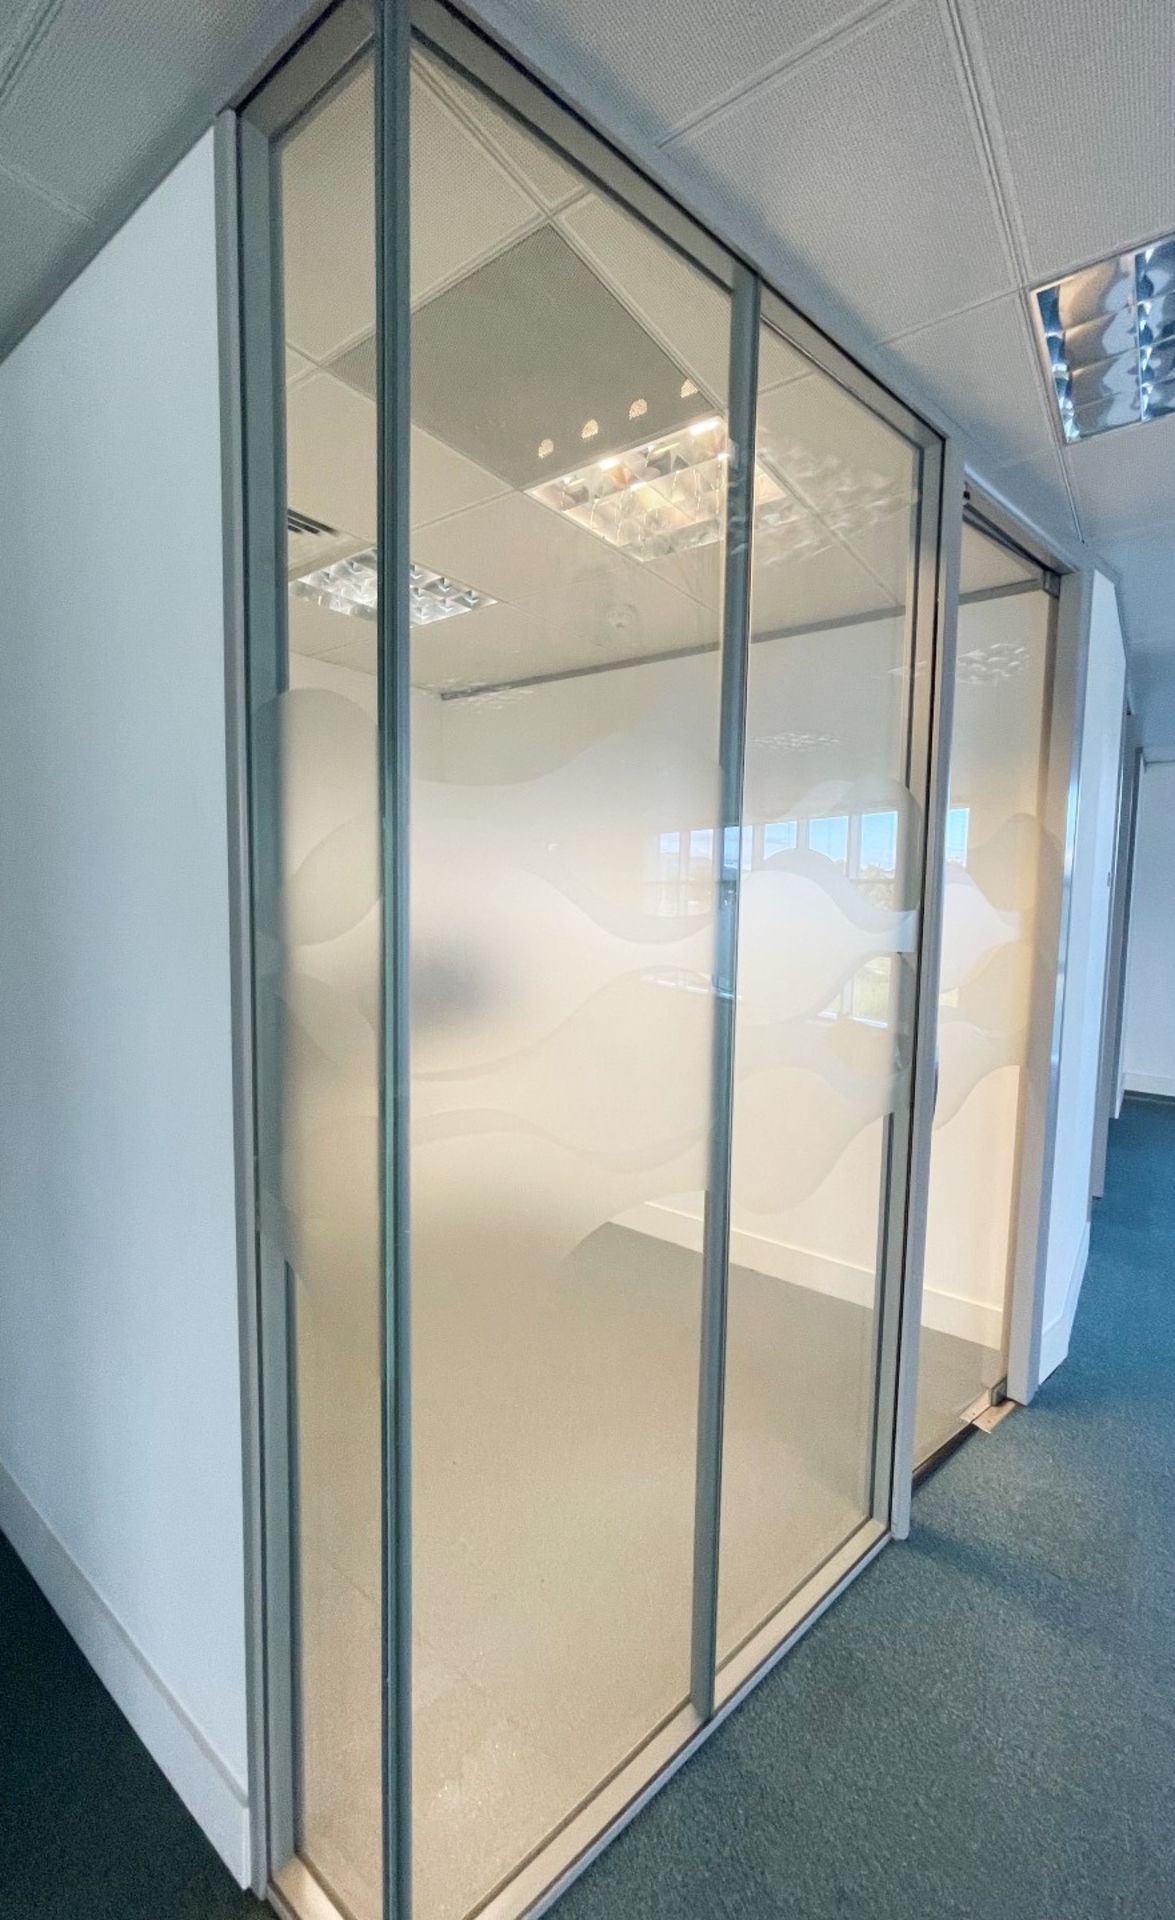 4 x Glass Office Cube Divider Panels - Inc. 2 x Glass Panels and Door - Currently Covering 237cm - Image 2 of 4